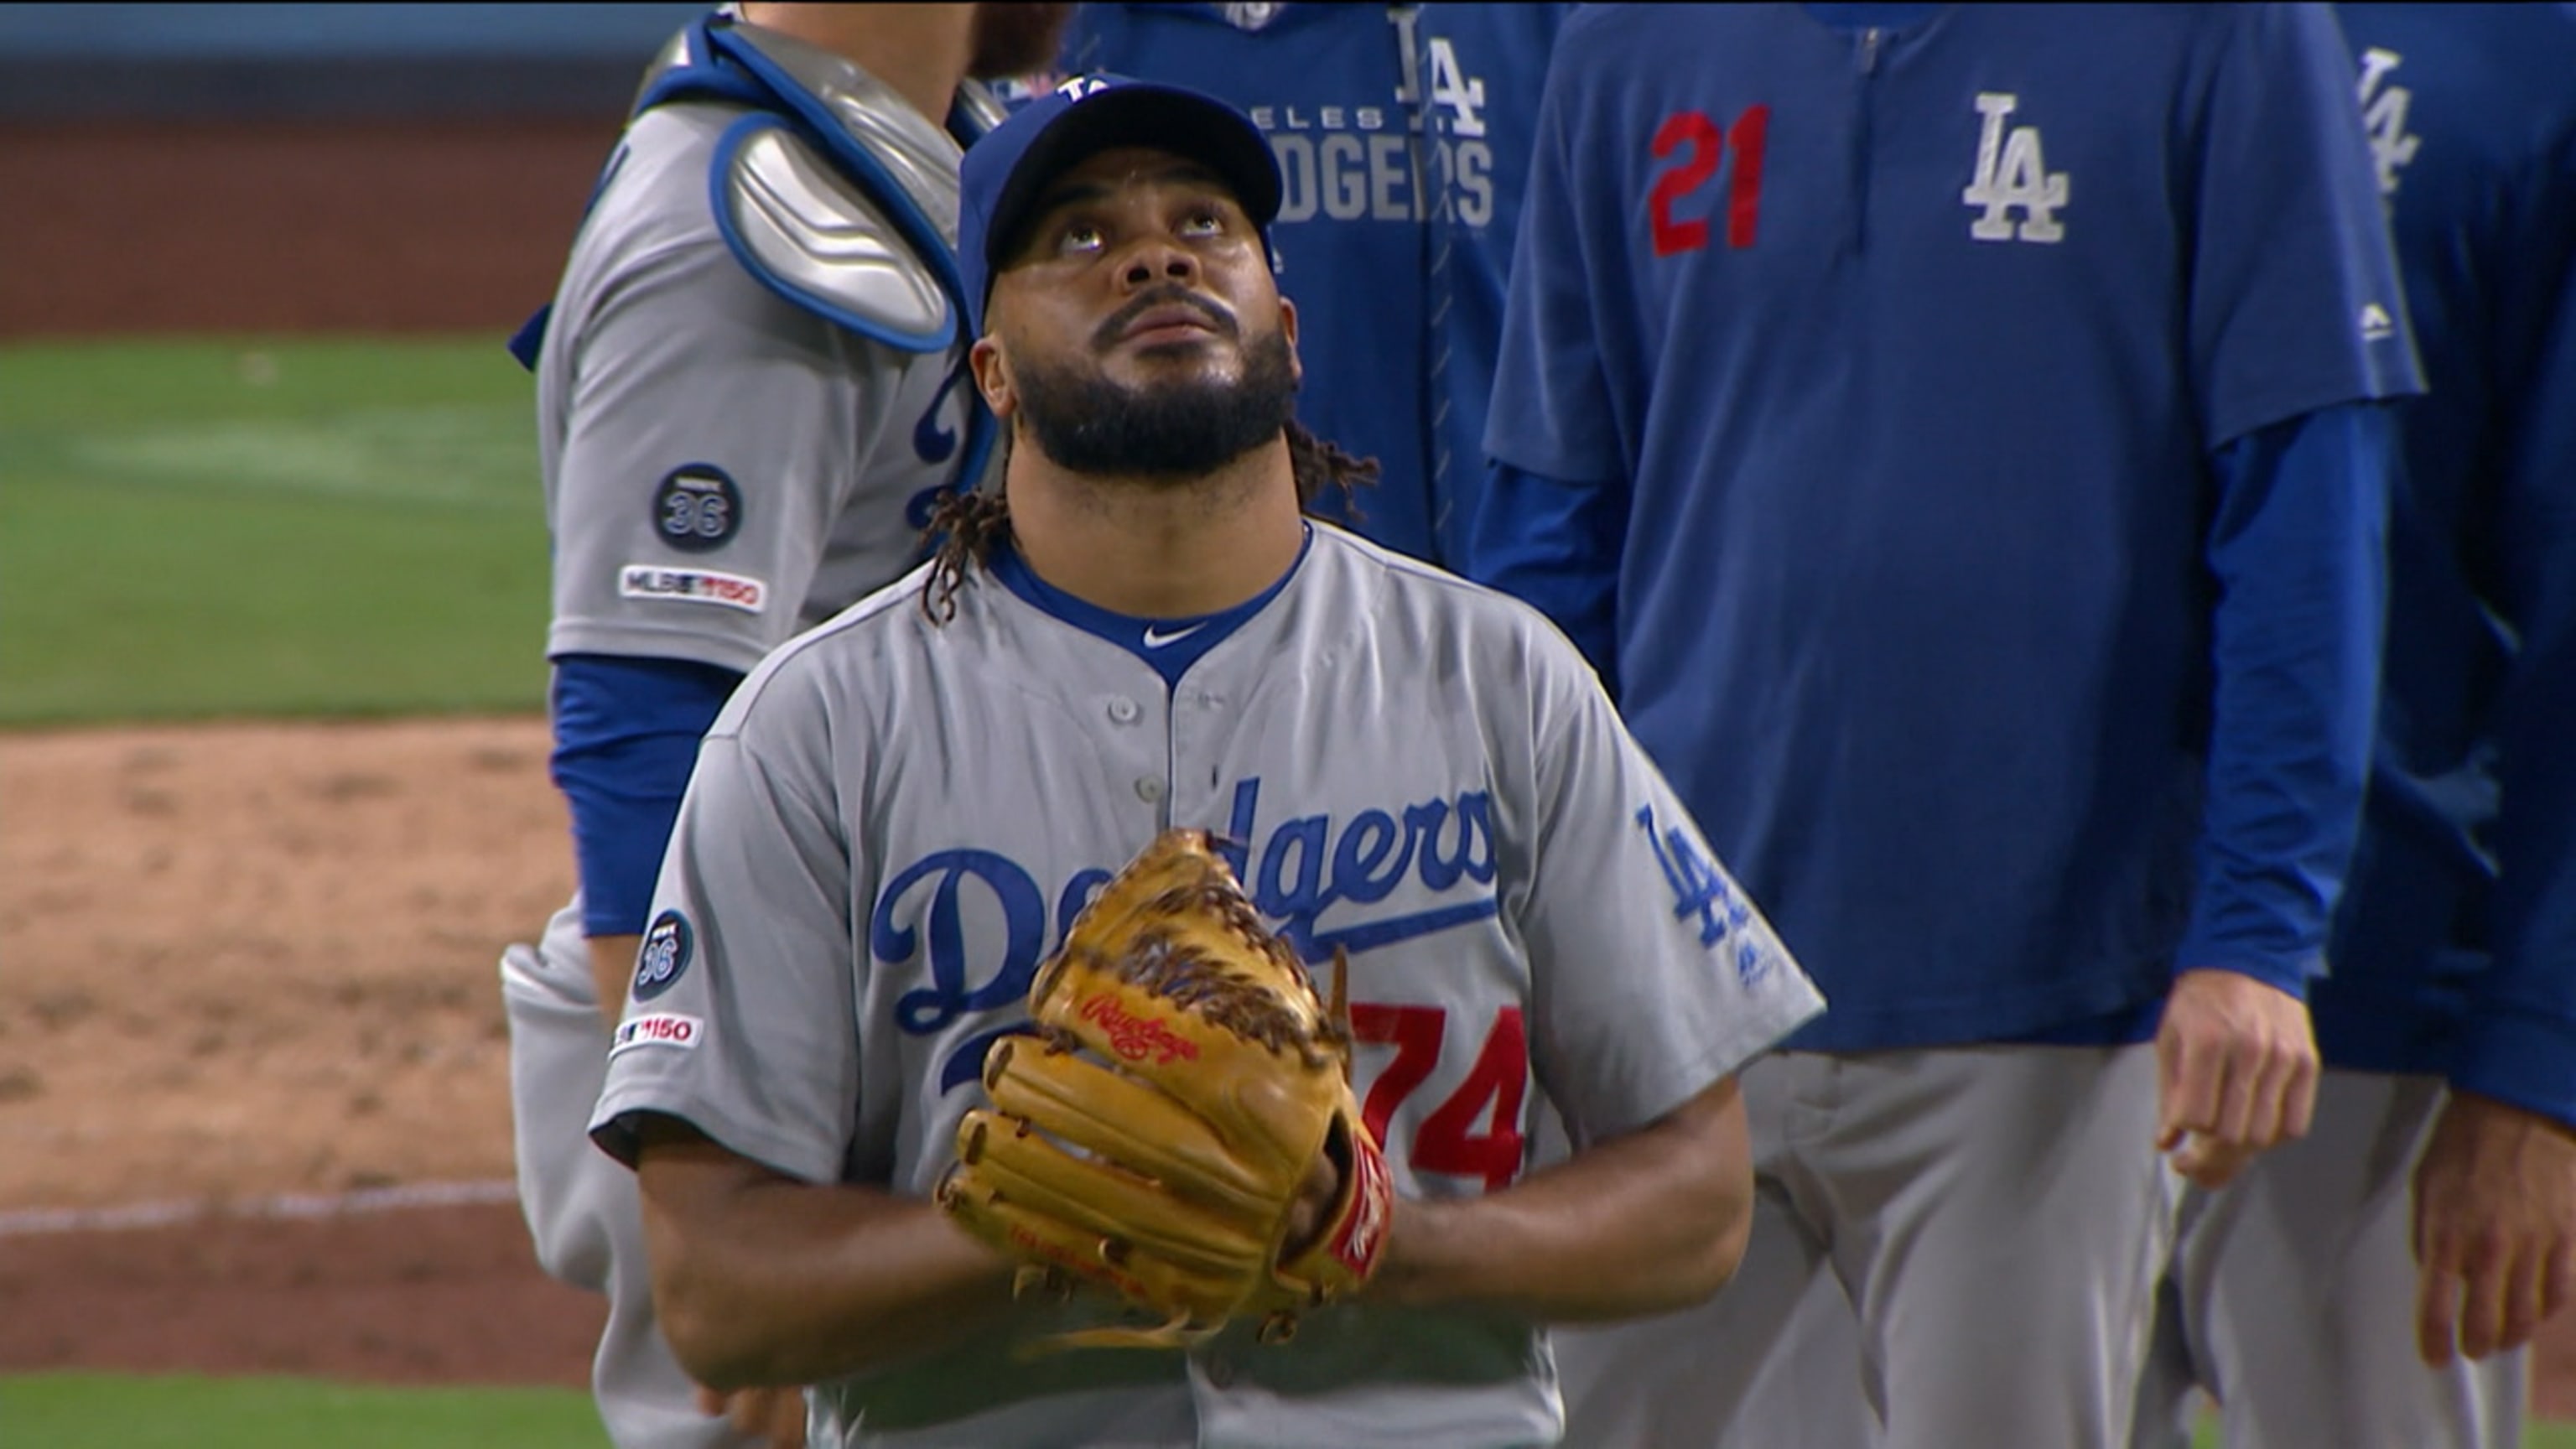 Eric Gagne, Kenley Jansen took different paths to closer's role